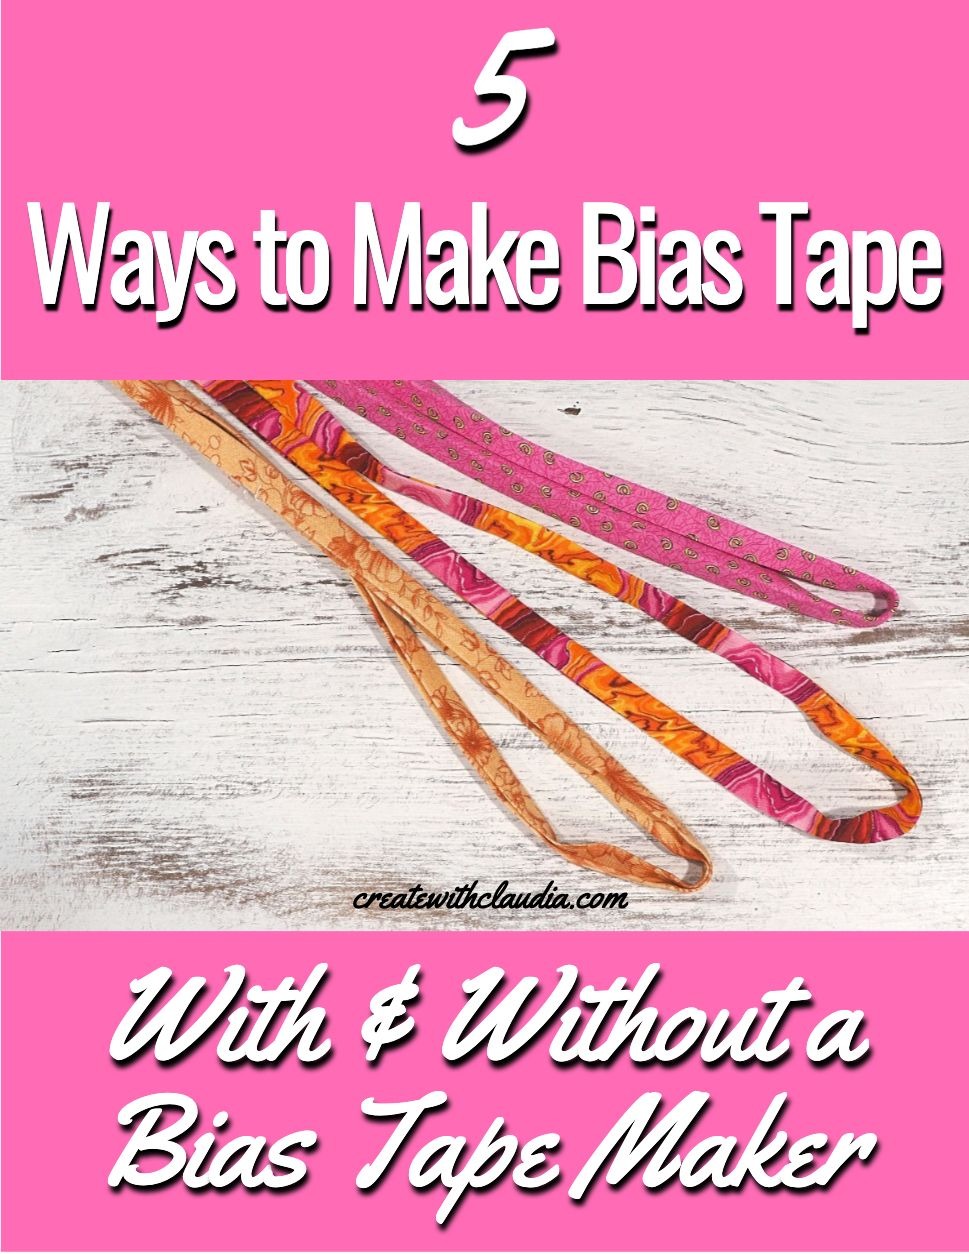 How to Make Bias Tape Without a Bias Tape Maker - Create with Claudia